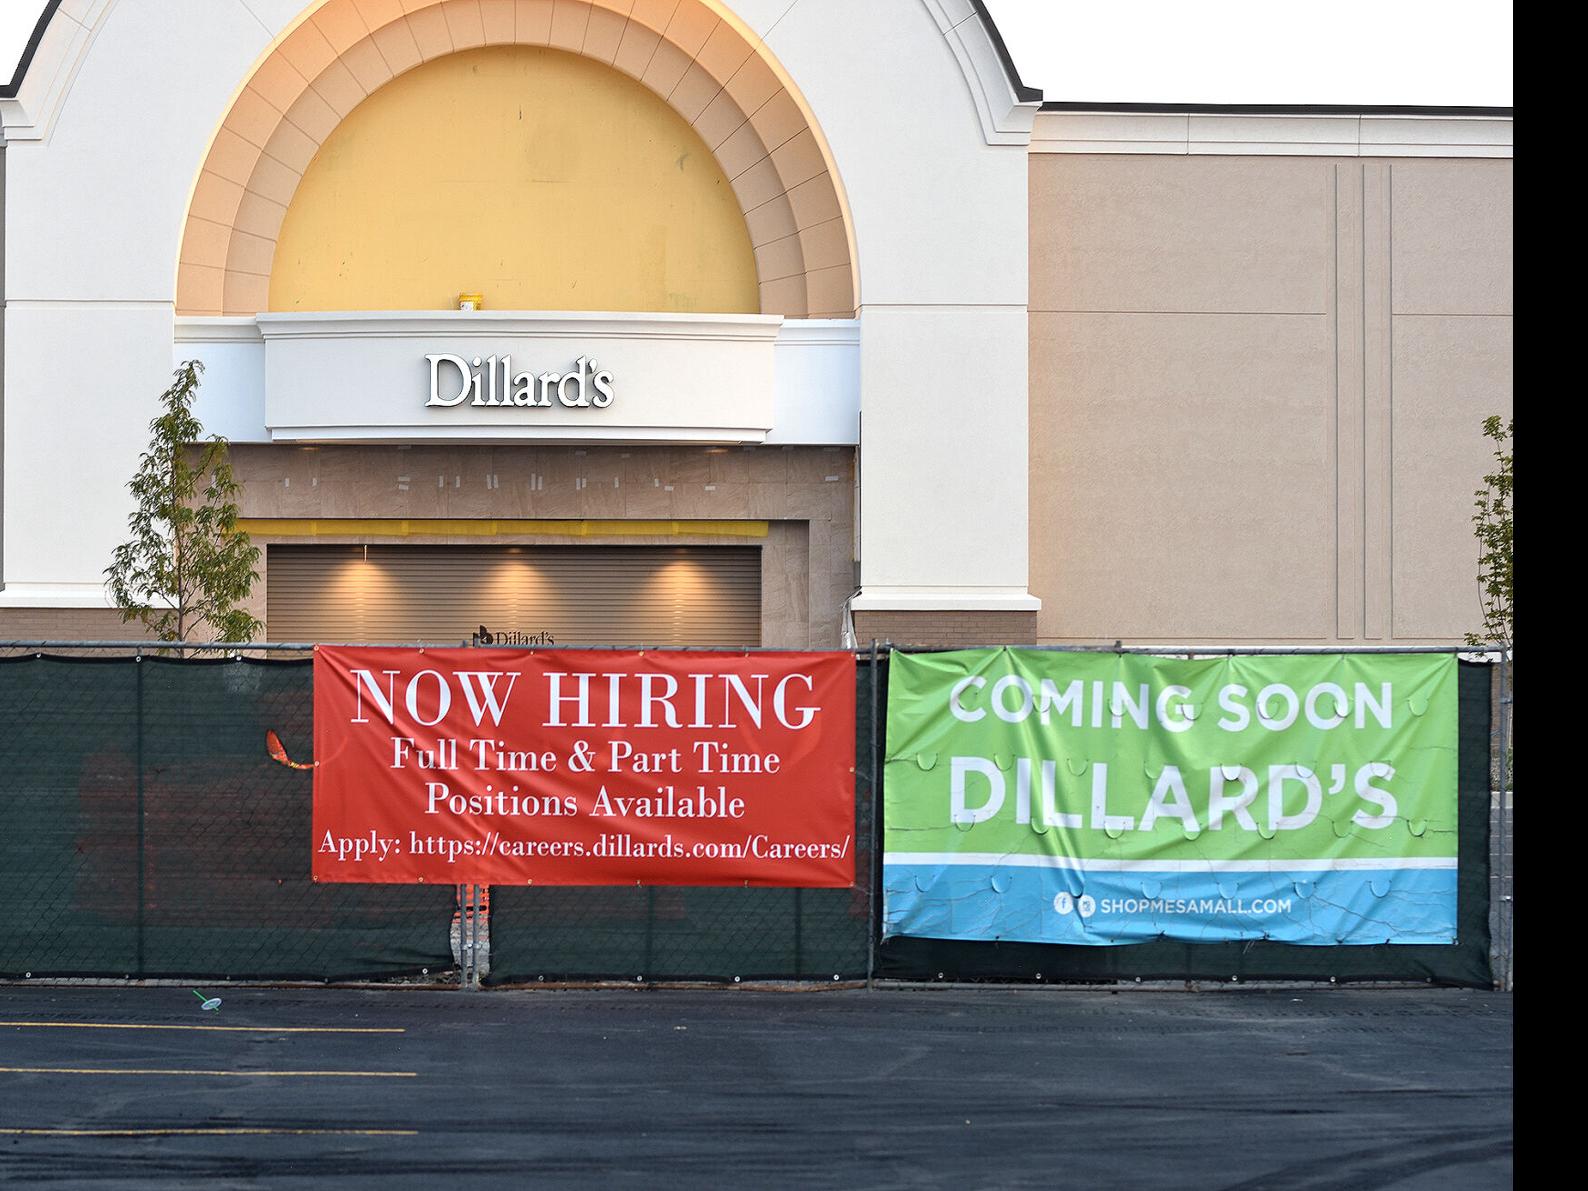 Dillards Store Ads: Exclusive Deals and Savings Await!